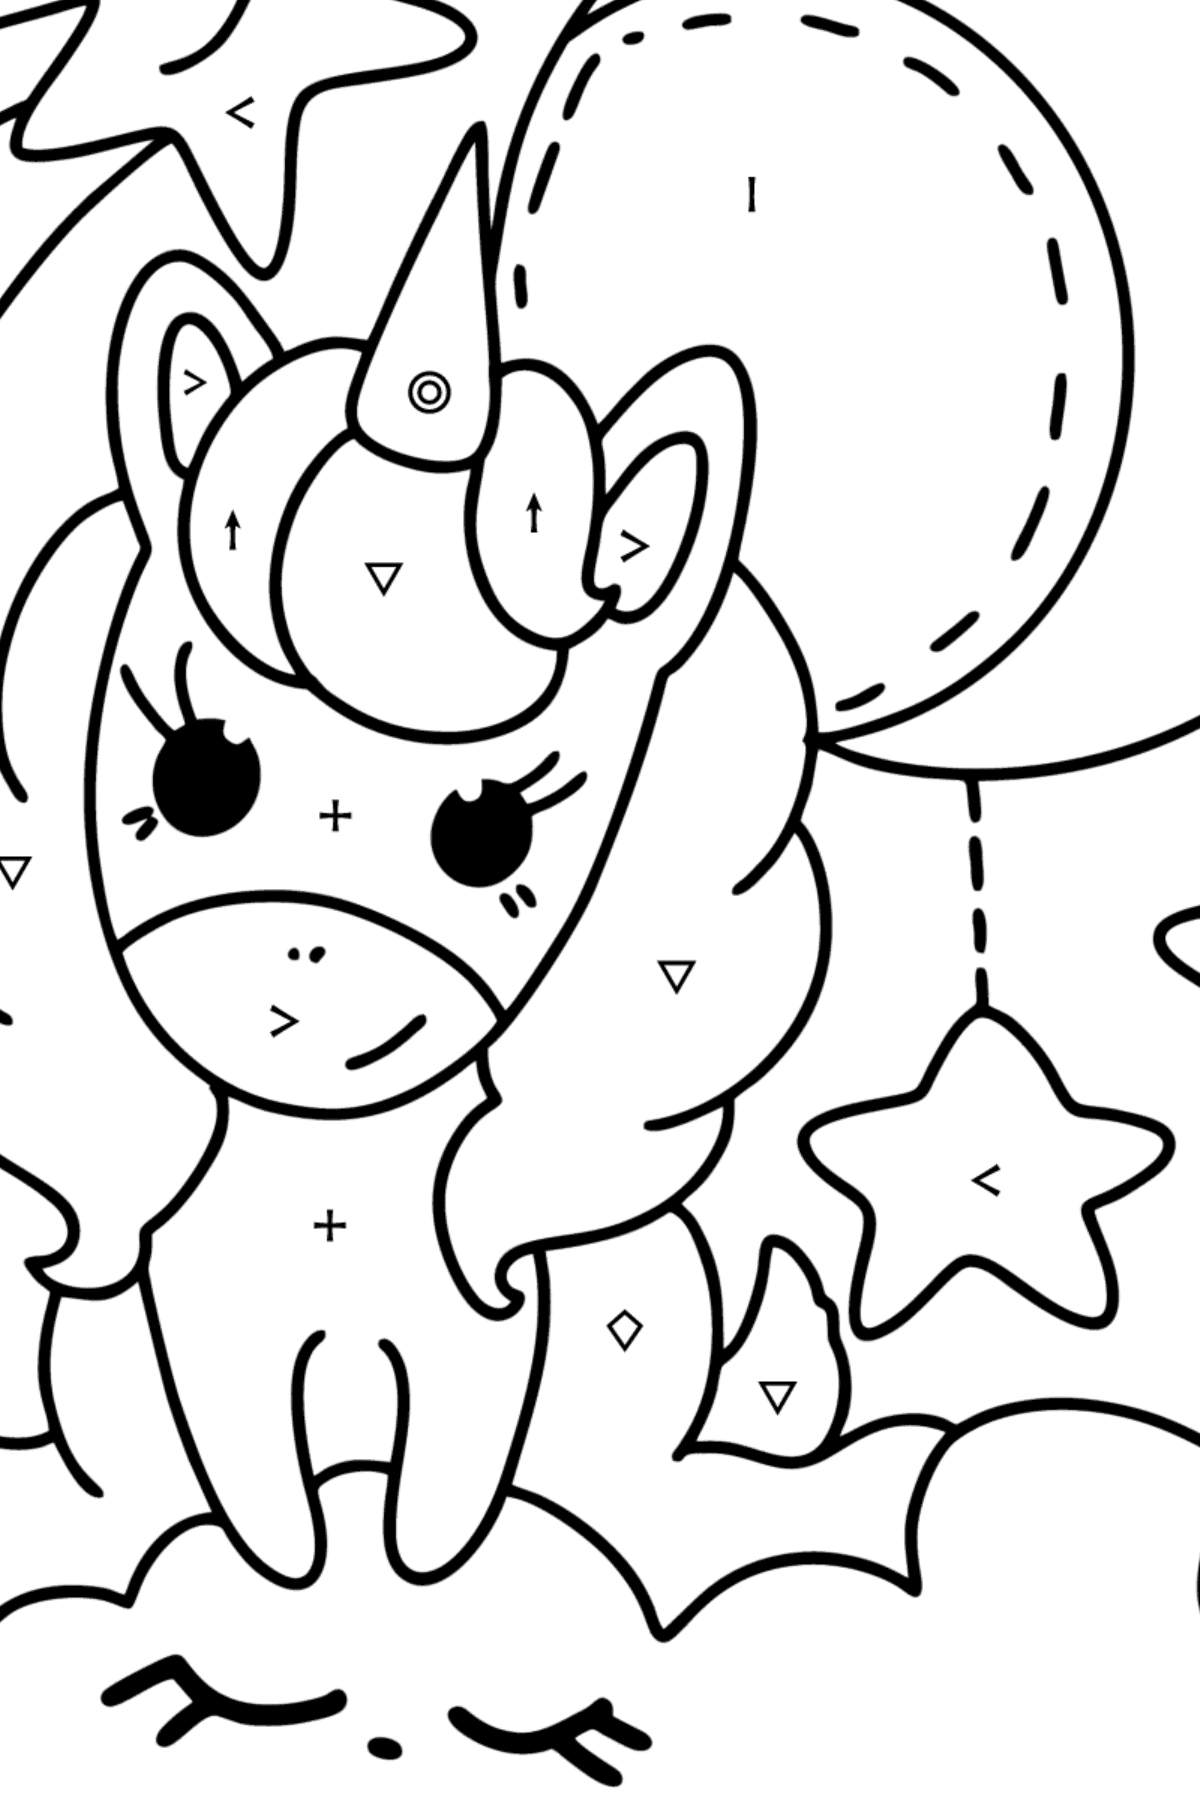 Moon unicorn coloring page - Coloring by Symbols and Geometric Shapes for Kids